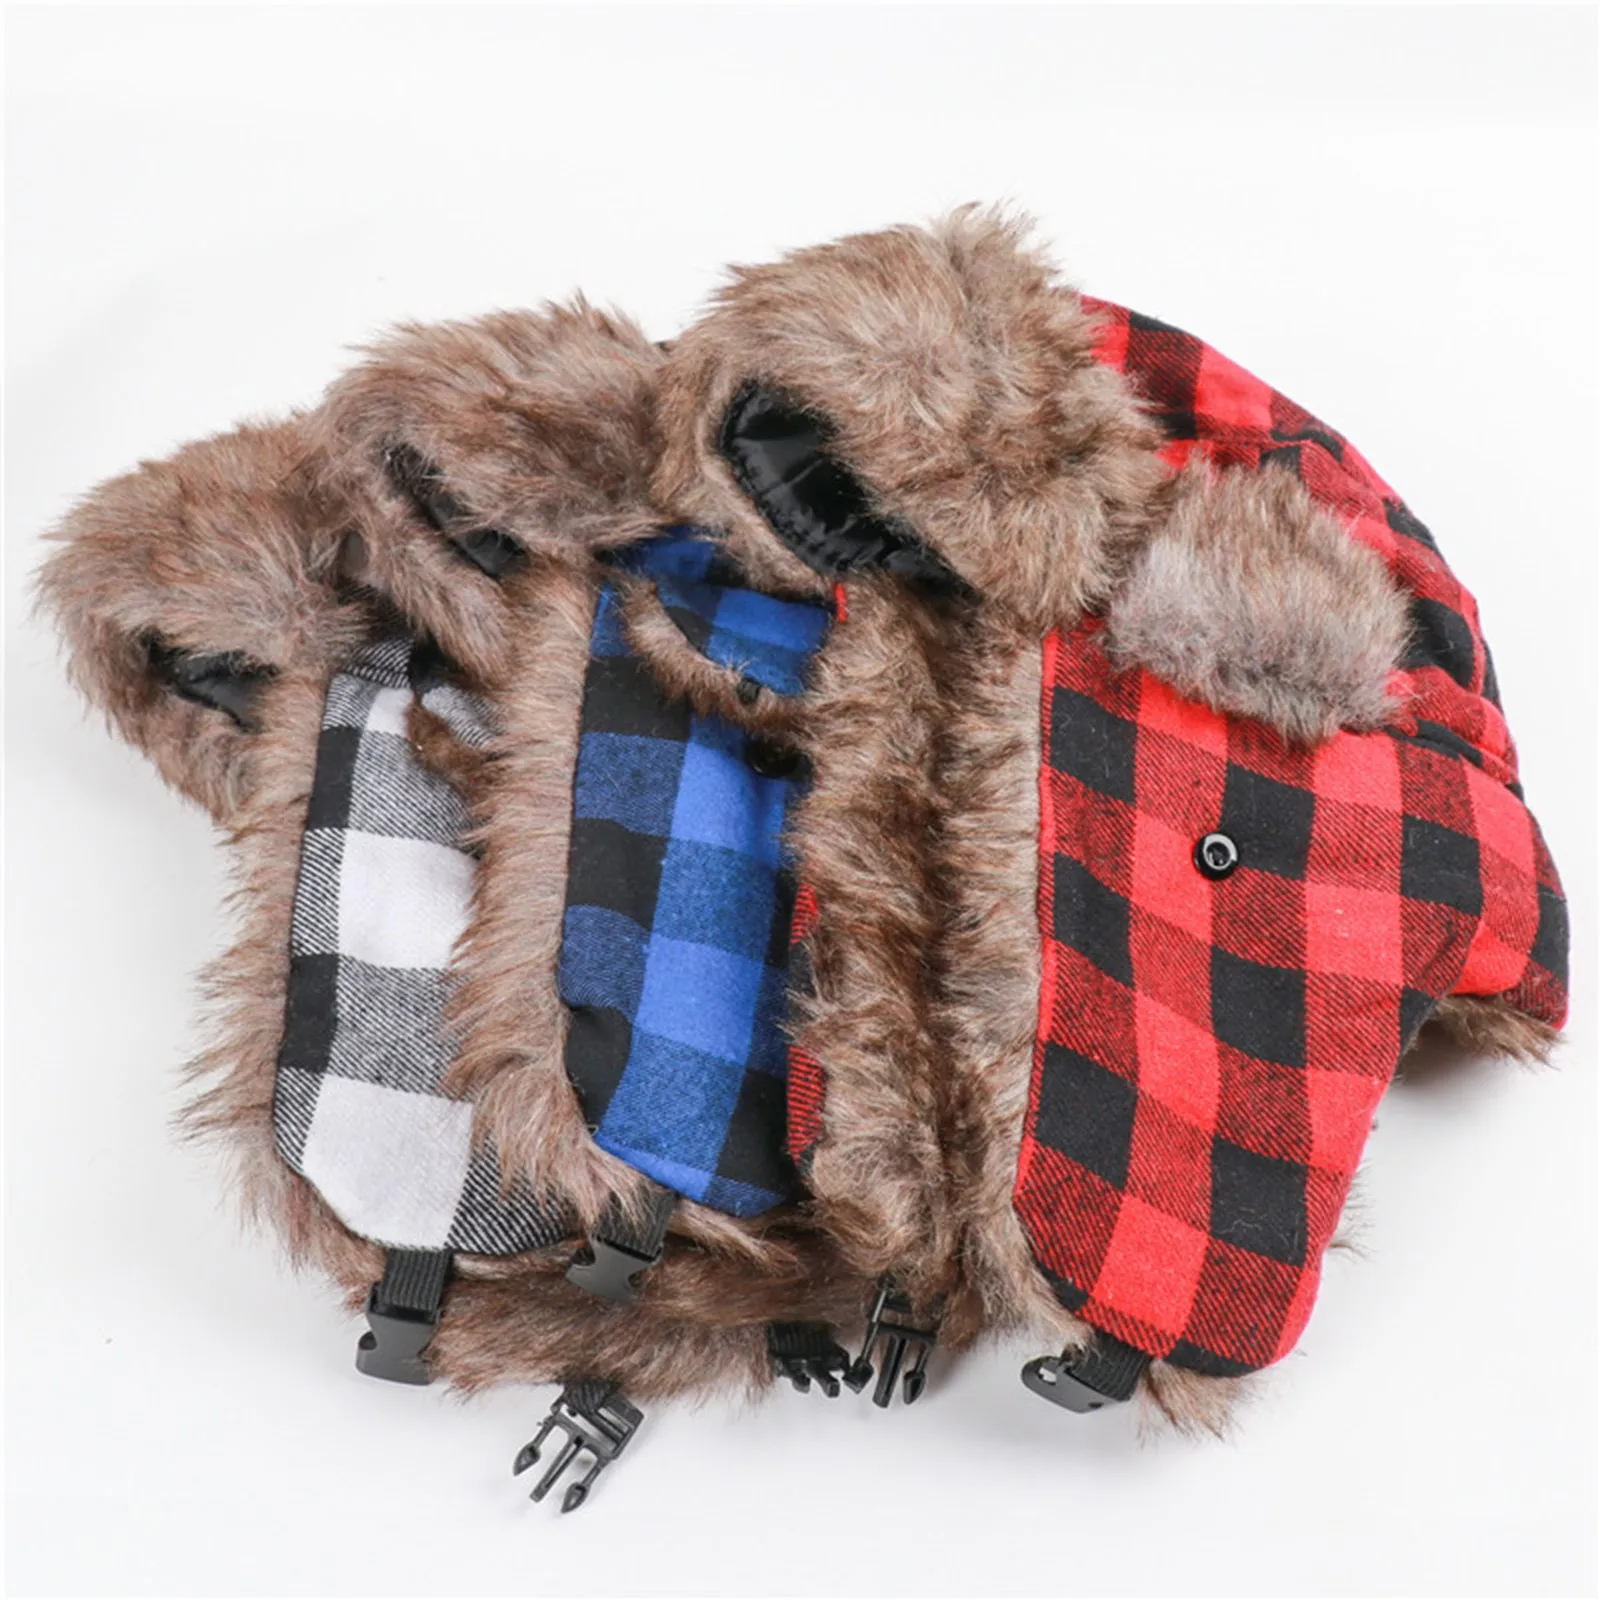 mad bomber trapper hat mens Winter Hats for Mens Bomber Hat Fur Red Warm Earflap Cap Windproof Women Thicker Plaid Russian Ushanka Lei Feng Hat Ski Snow Cap navy blue bomber hat